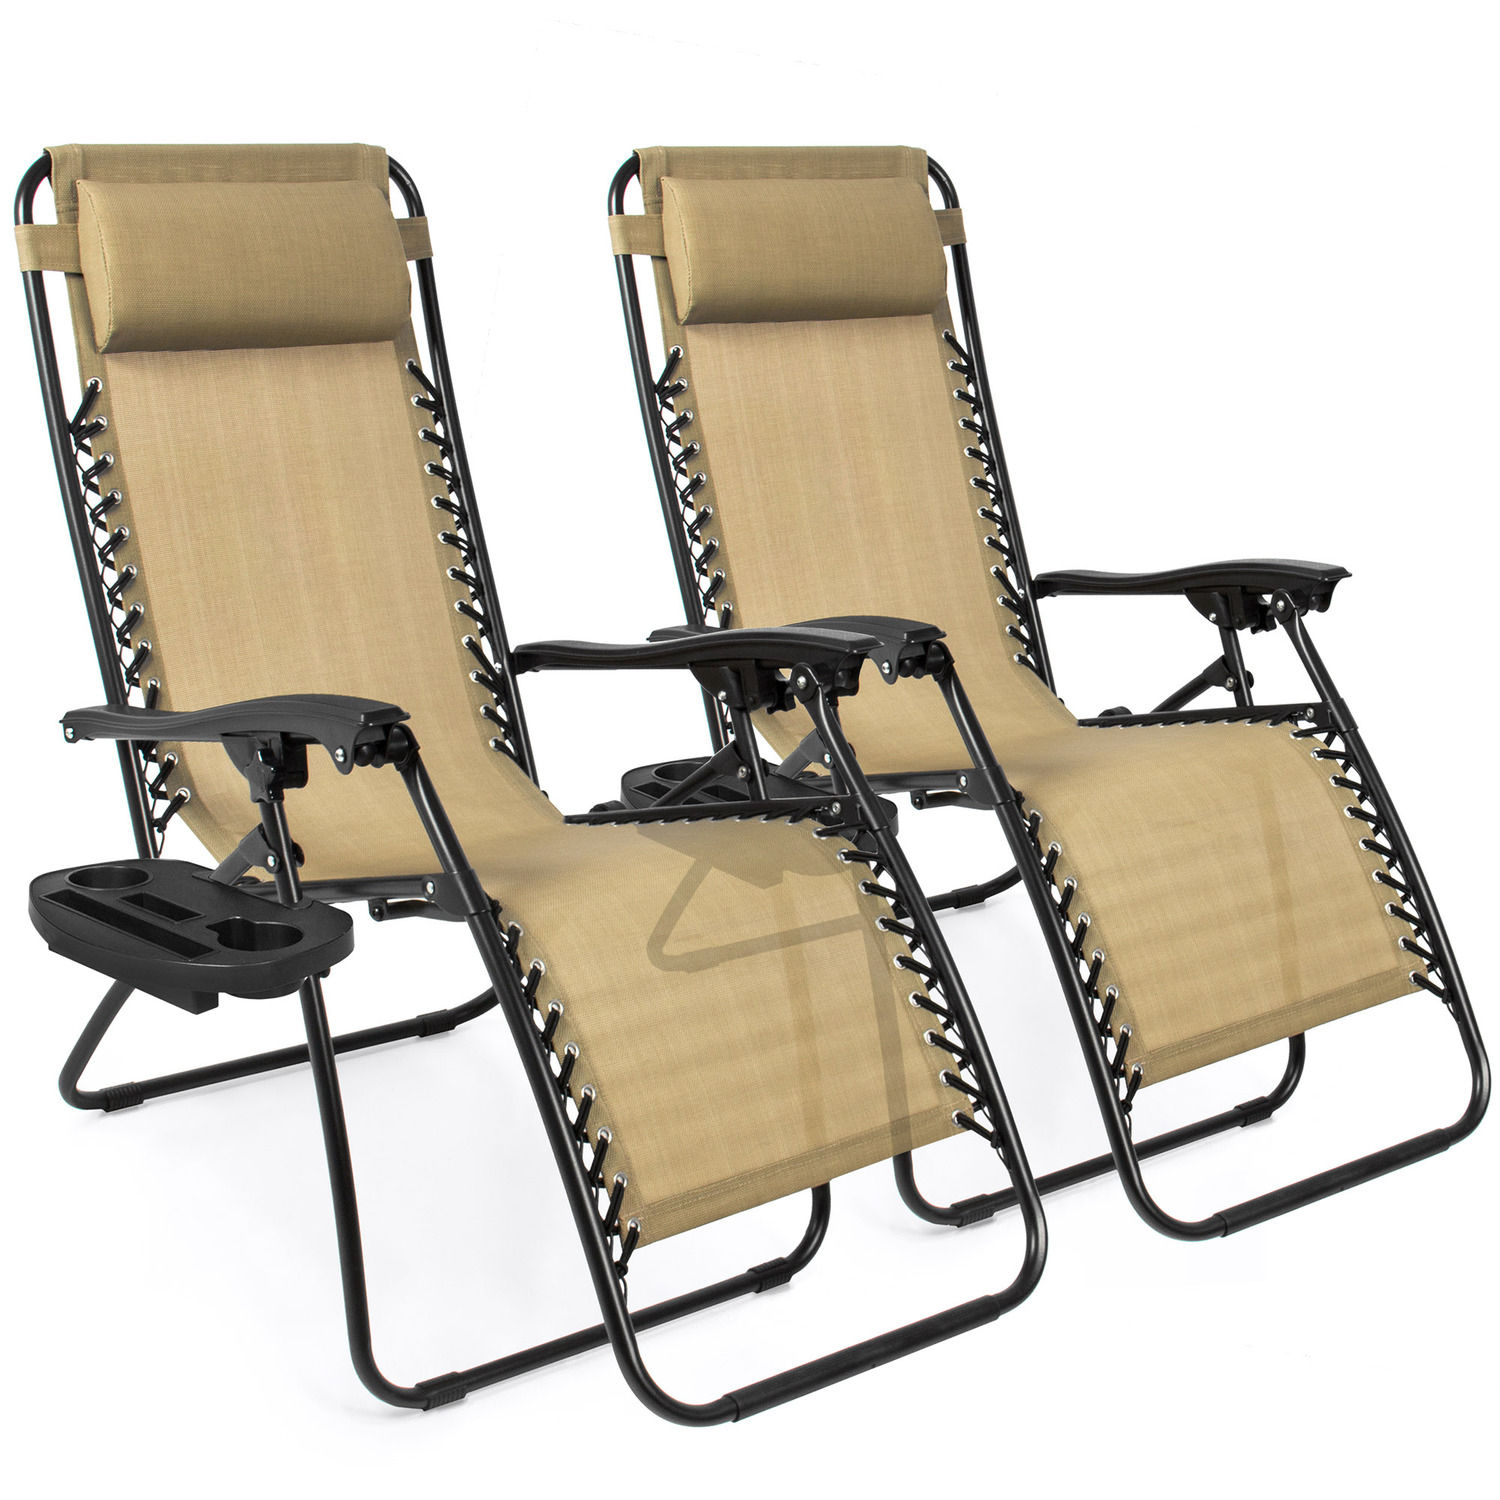 Best Choice Products Set of 2 Adjustable Zero Gravity Lounge Chair Recliners for